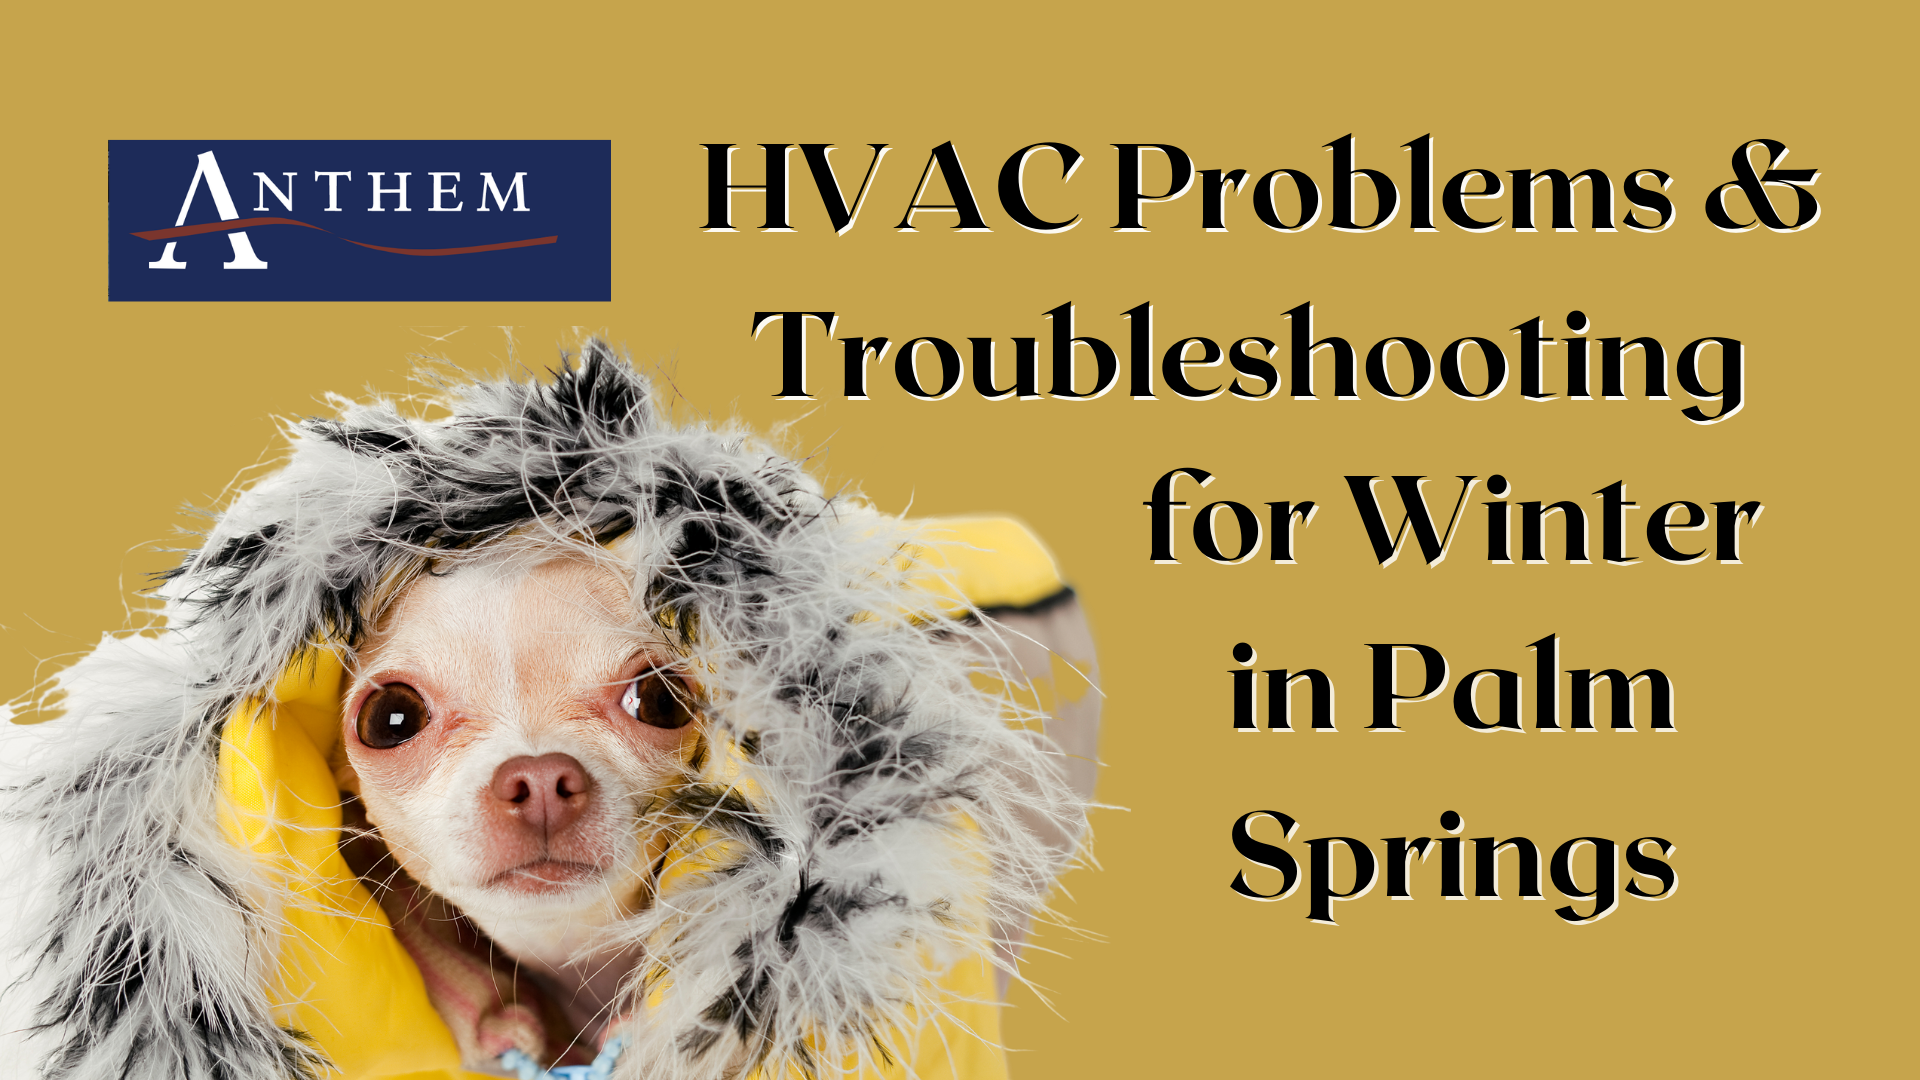 HVAC Problems and Troubleshooting for Winter in Palm Springs